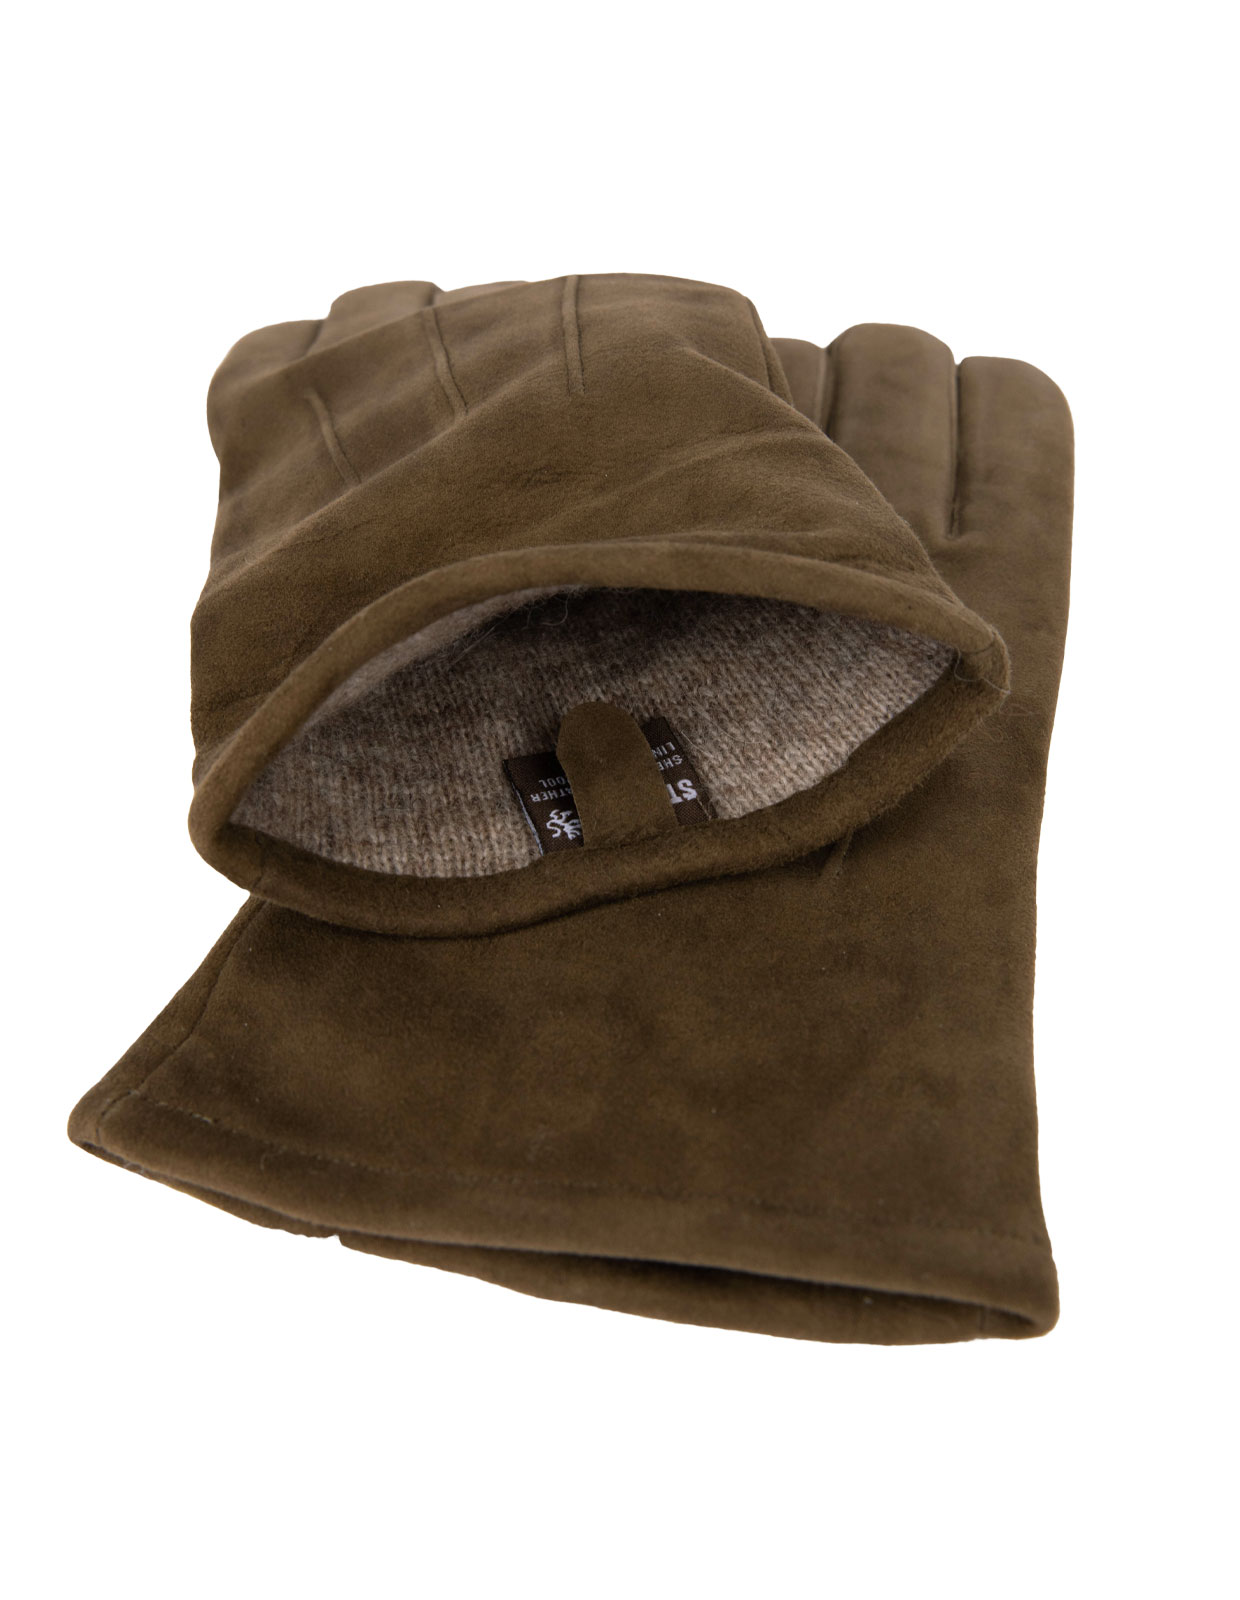 Classic Suede Gloves Olive Green Stl 9